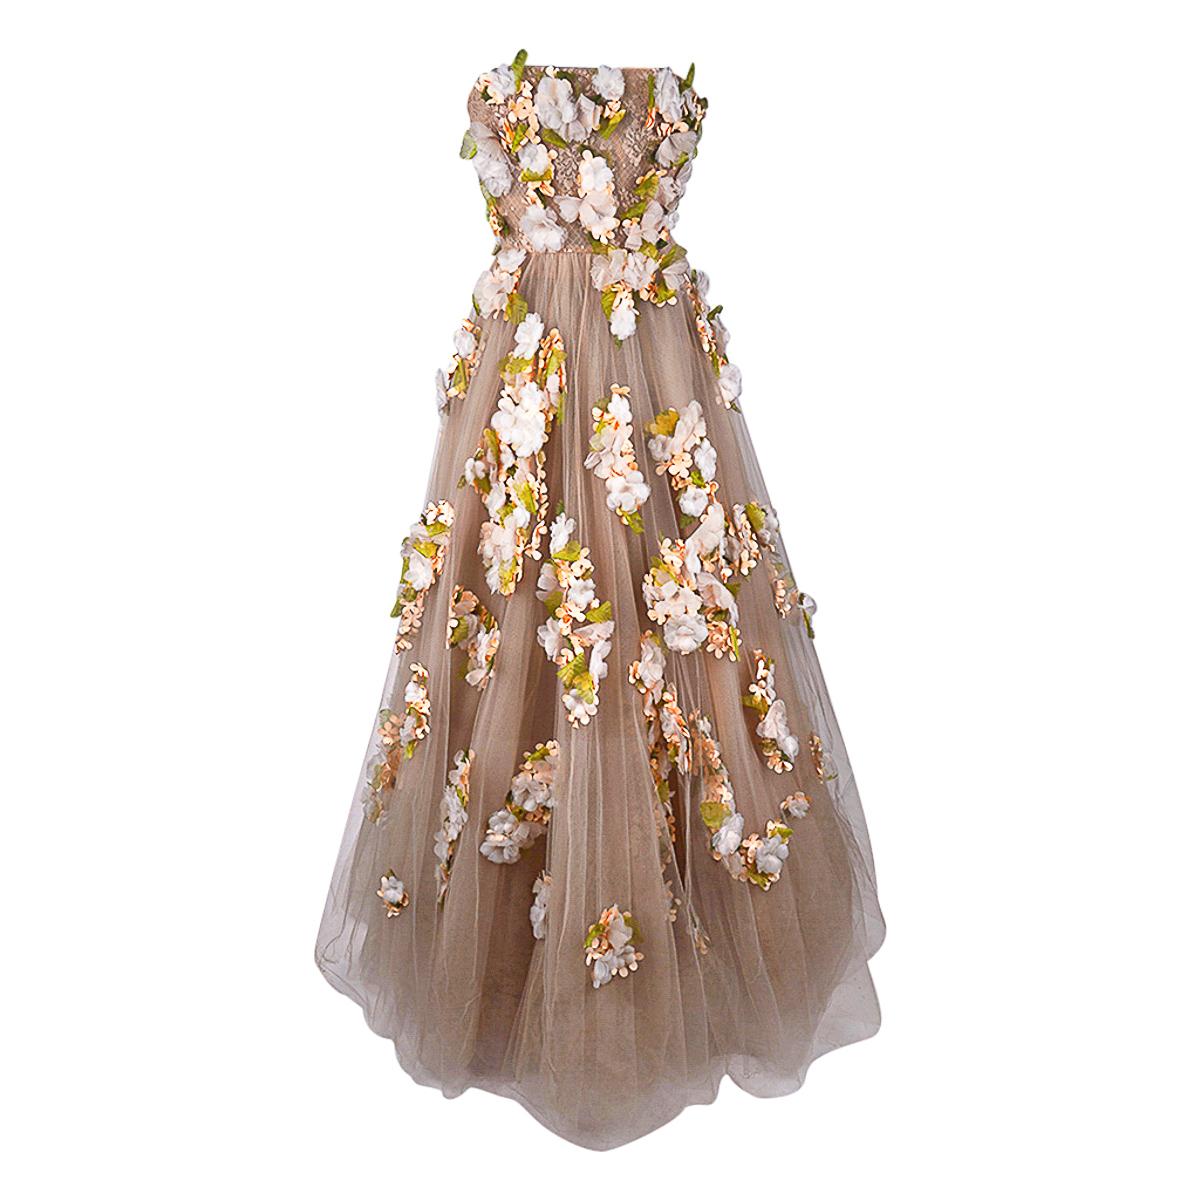 Valentino Strapless Empire Nude Flower Adorned Gown 1 of 2 Size 0